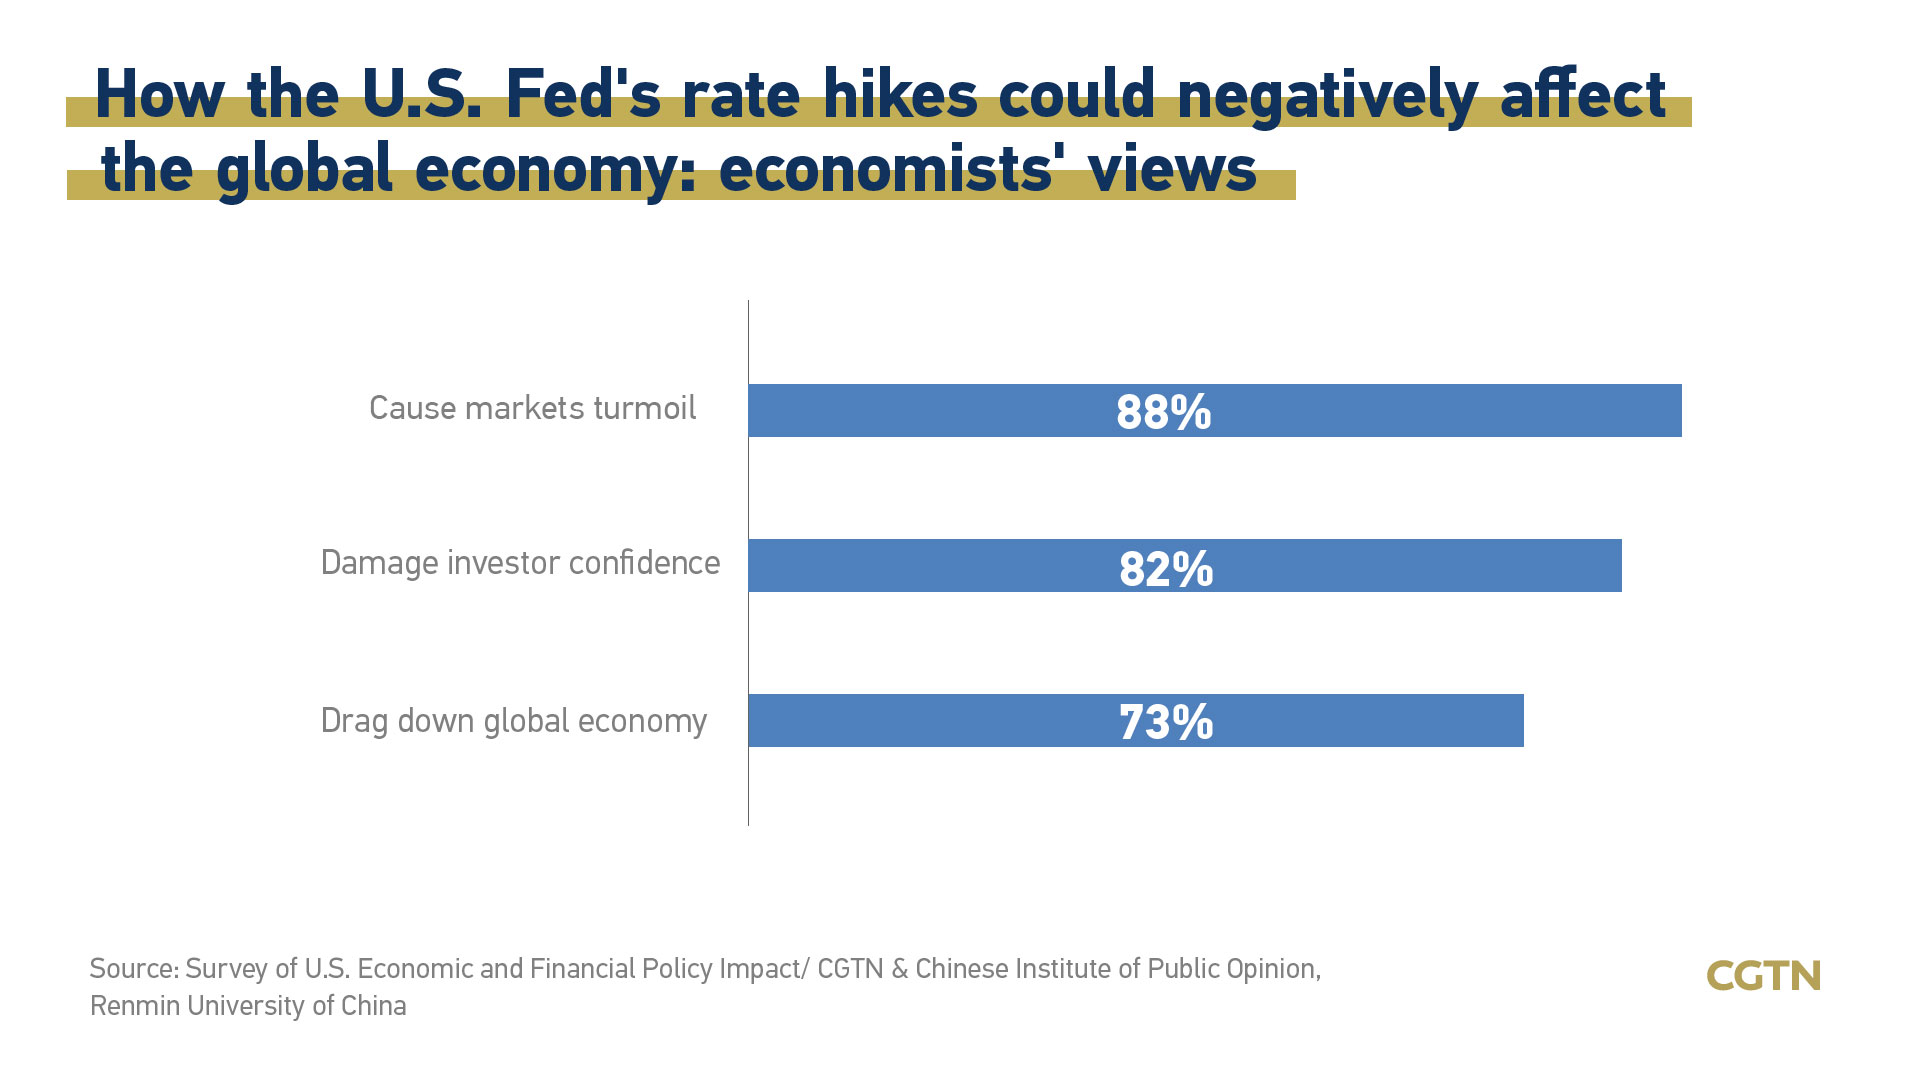 Fed rate hikes raise fears of global recession: economists survey